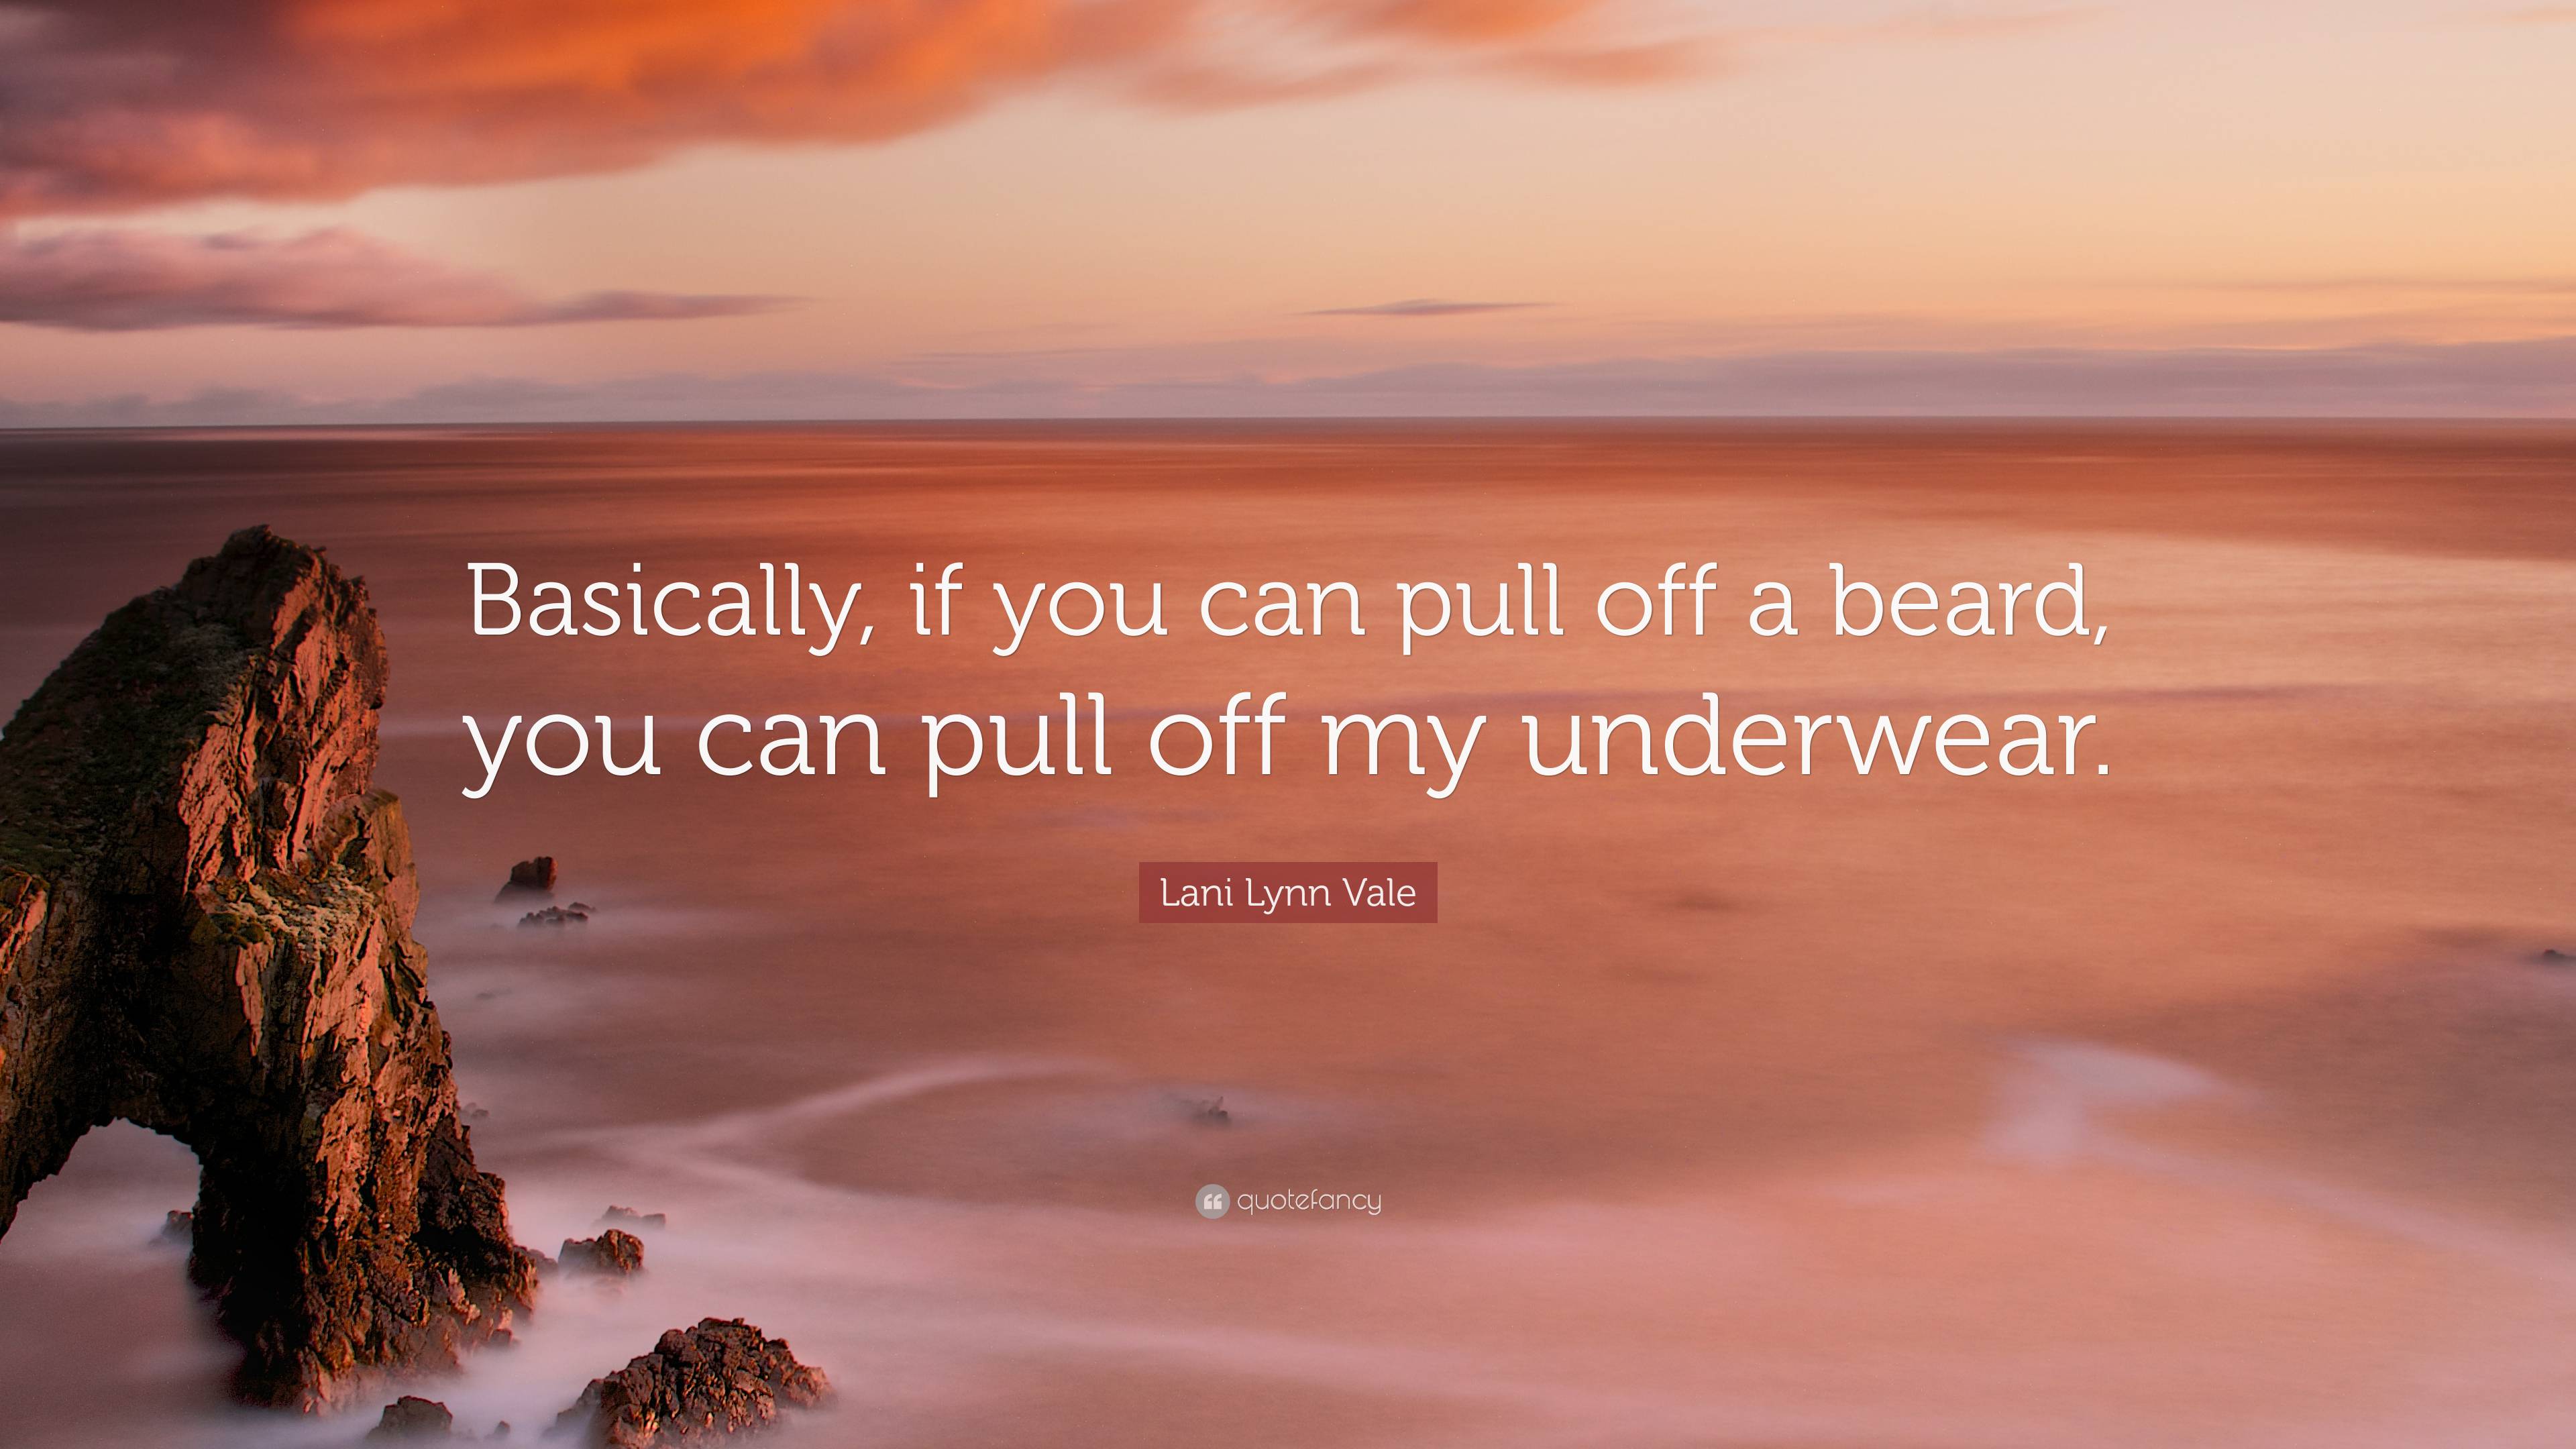 https://quotefancy.com/media/wallpaper/3840x2160/7598068-Lani-Lynn-Vale-Quote-Basically-if-you-can-pull-off-a-beard-you-can.jpg